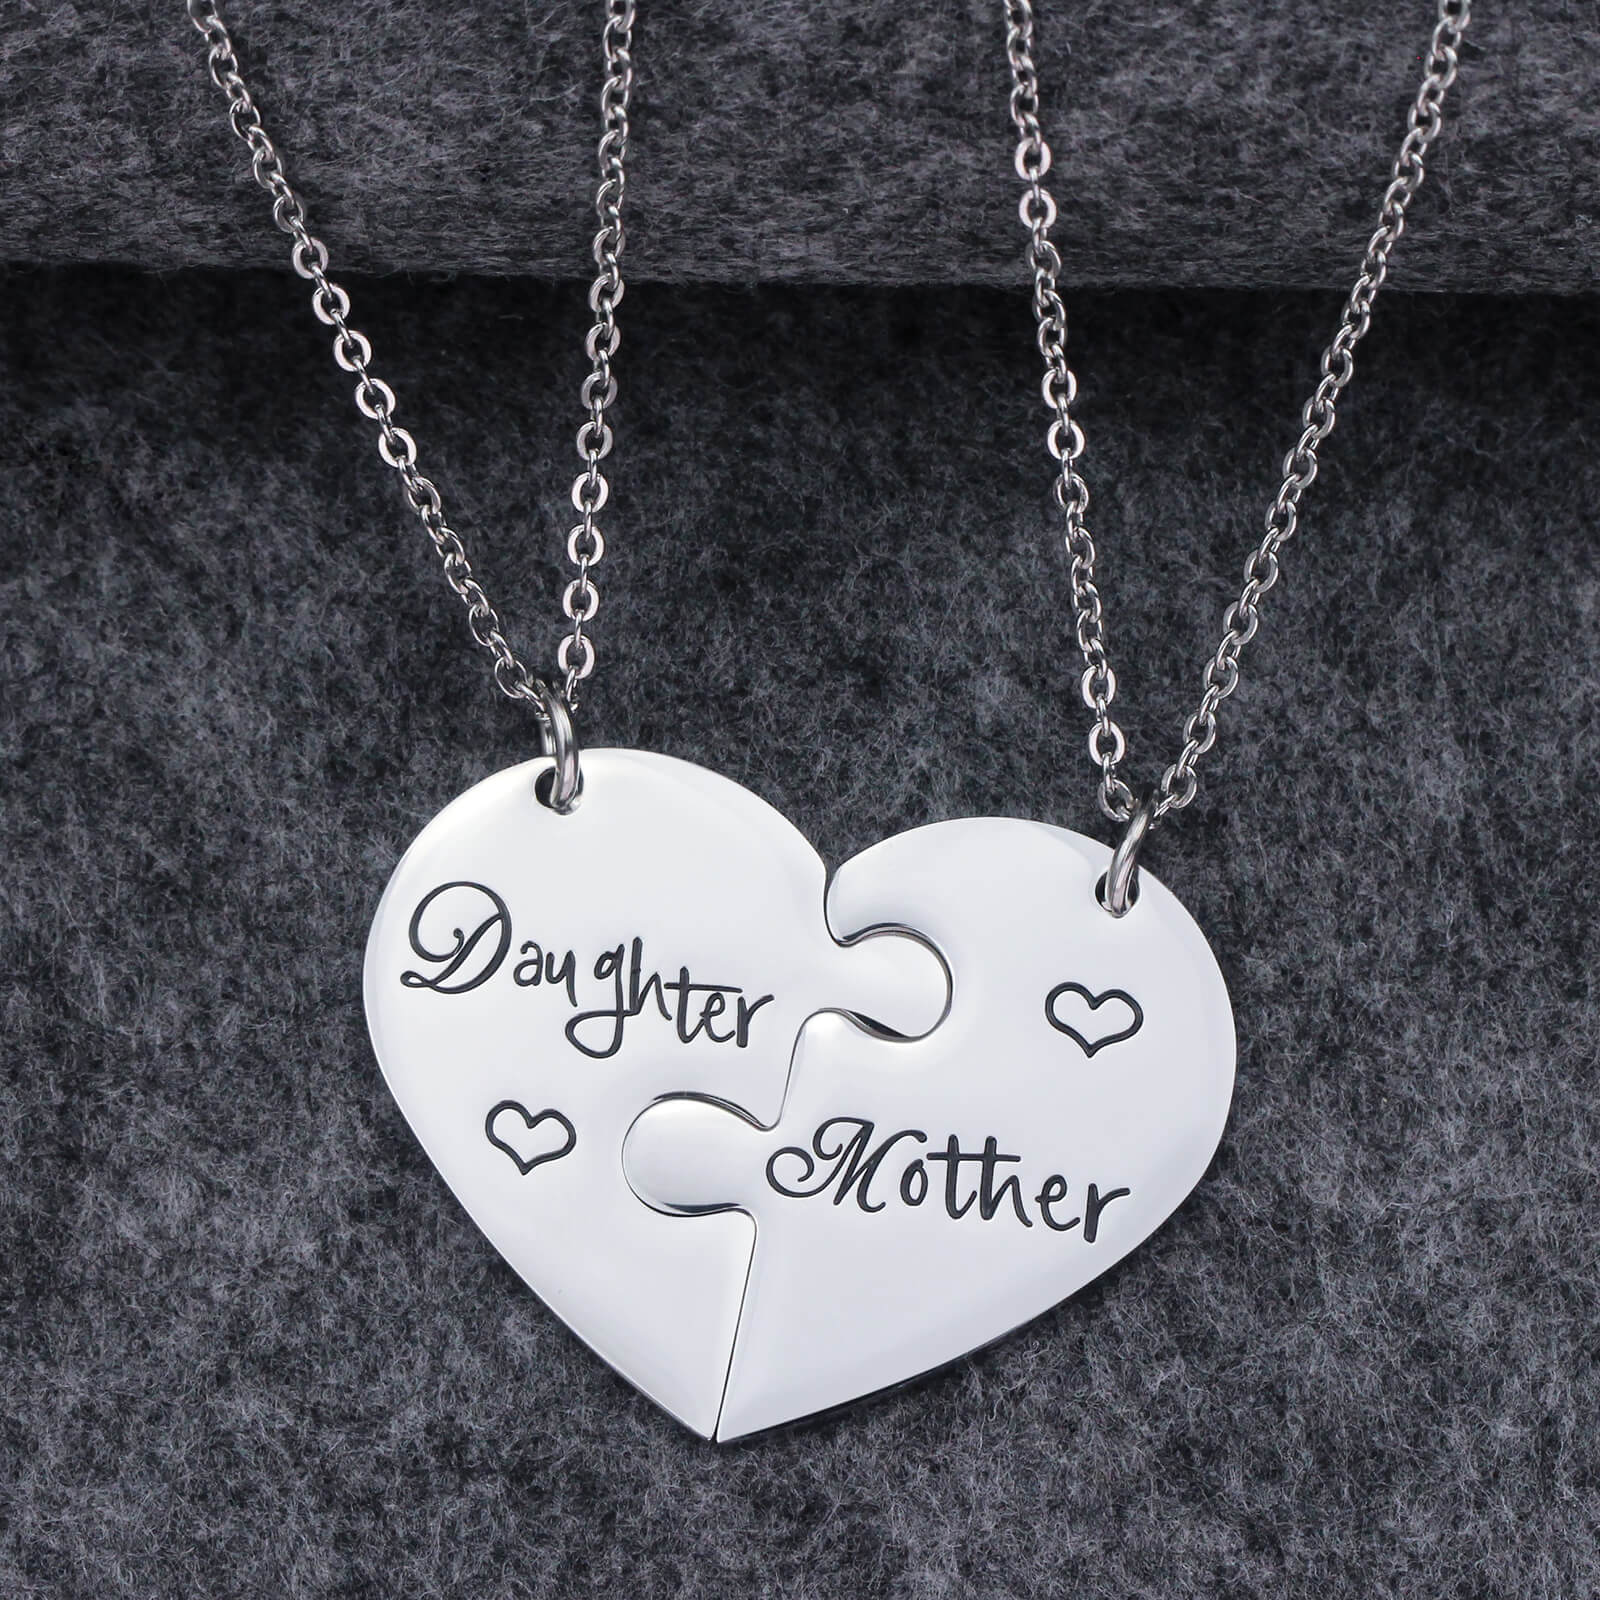 Daughter Mother Stainless Steel Necklace STC 1015 S